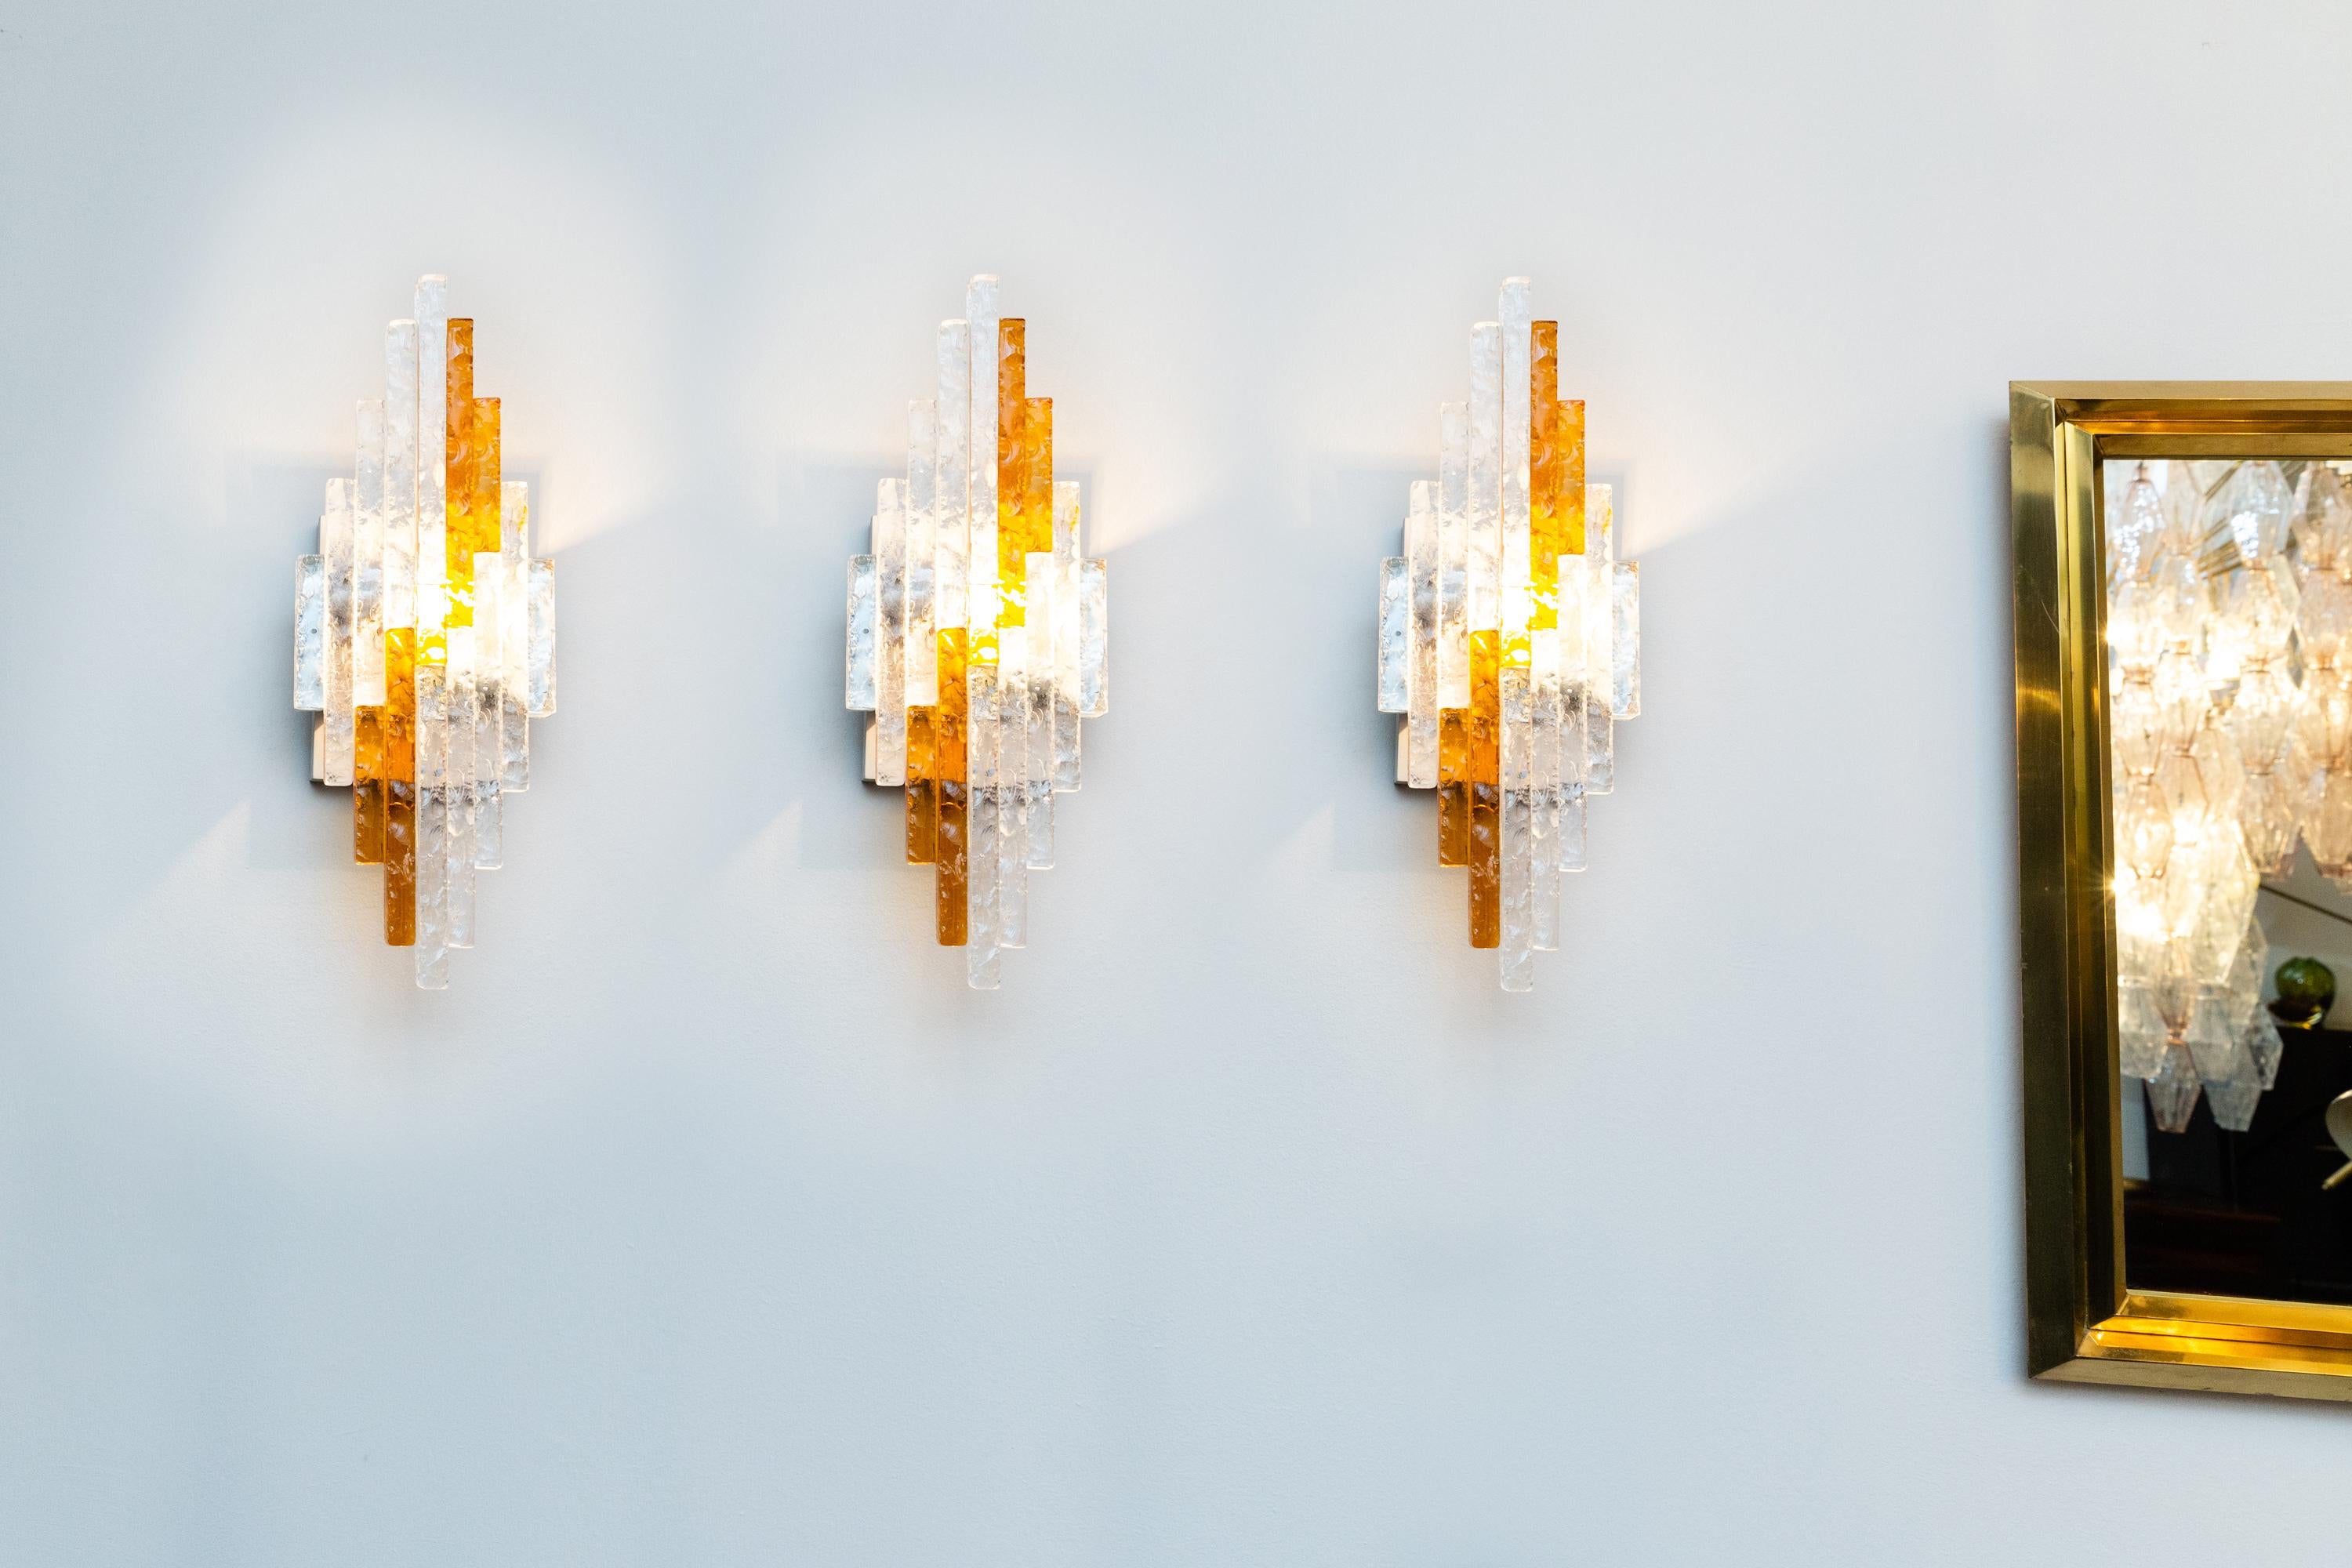 Three wall lamps by Albano Poli
Chromed metal, colored and transparent glass elements.
Prod. Poliarte, Italy, 1970s
Very good condition. Measures: cm 50 x 20 x 10.